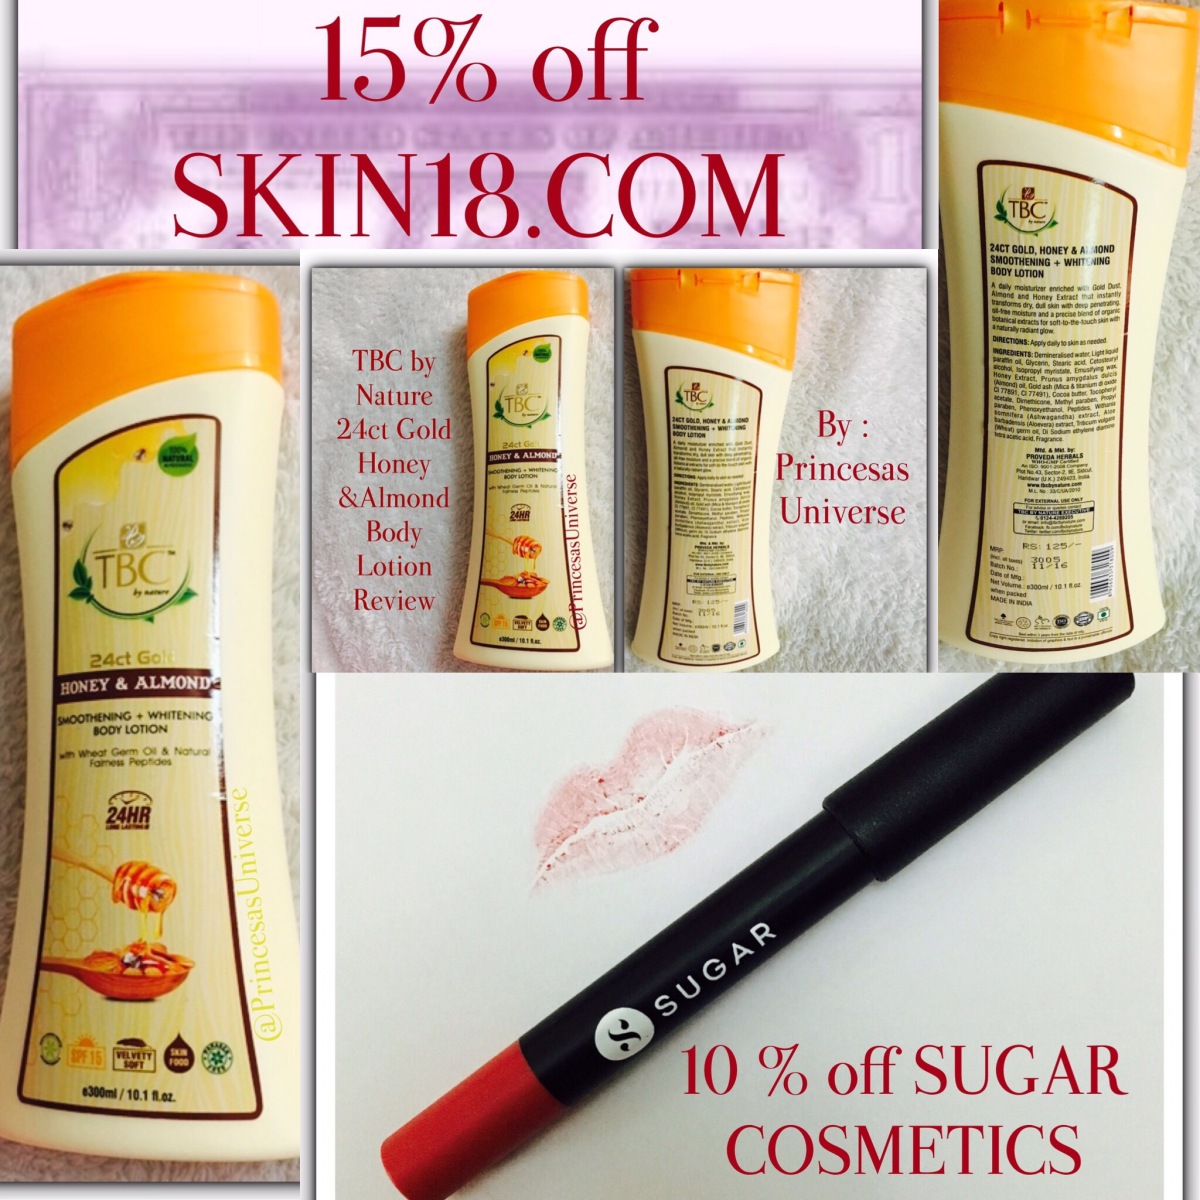 Winter is Coming – TBC by Nature 24 ct Gold Honey and Almond Body Lotion Review + Skin18 50% off Sale  + Sugar Cosmetics 10% off Coupon + Giveaway 